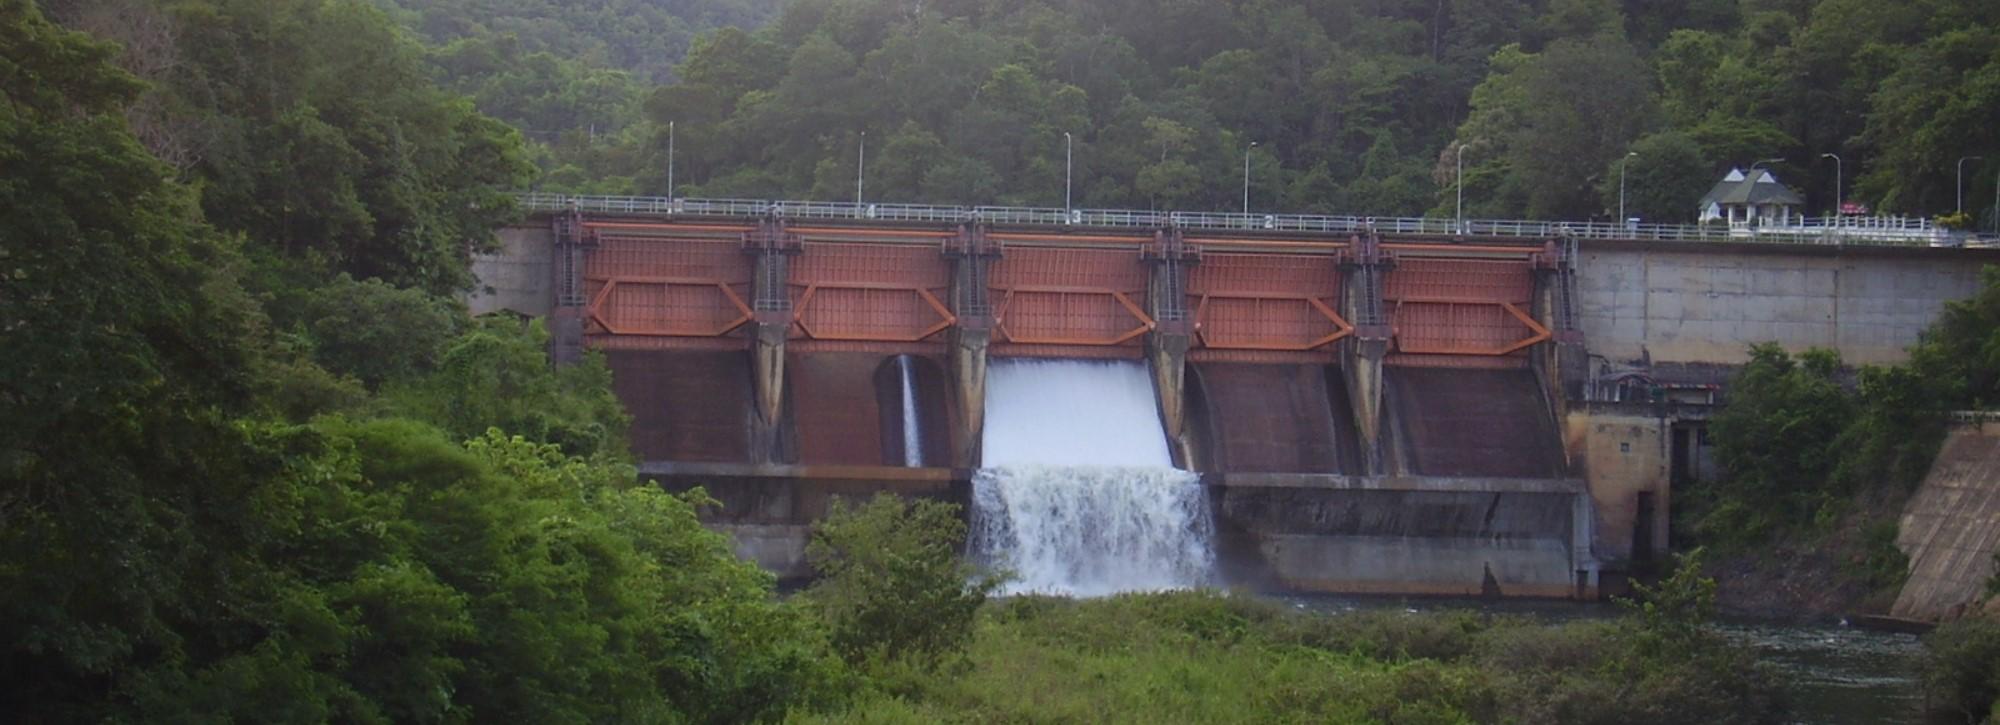 View of outfall of Kio Kno Ma Dam, Thailand